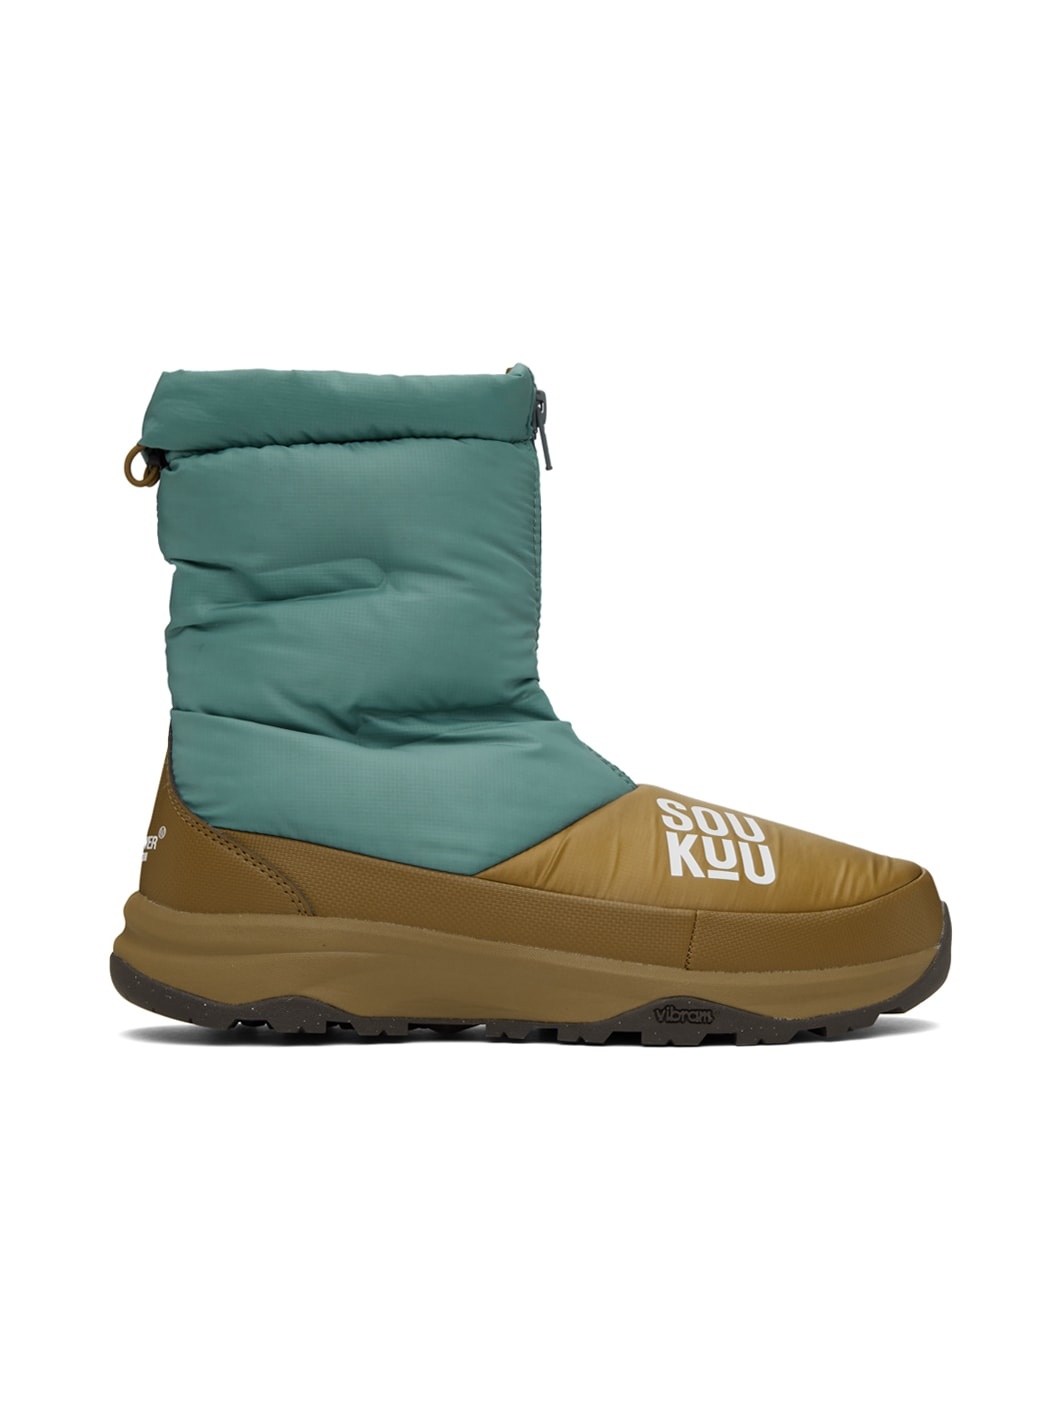 Green & Beige The North Face Edition Soukuu Nuptse Boots - 1